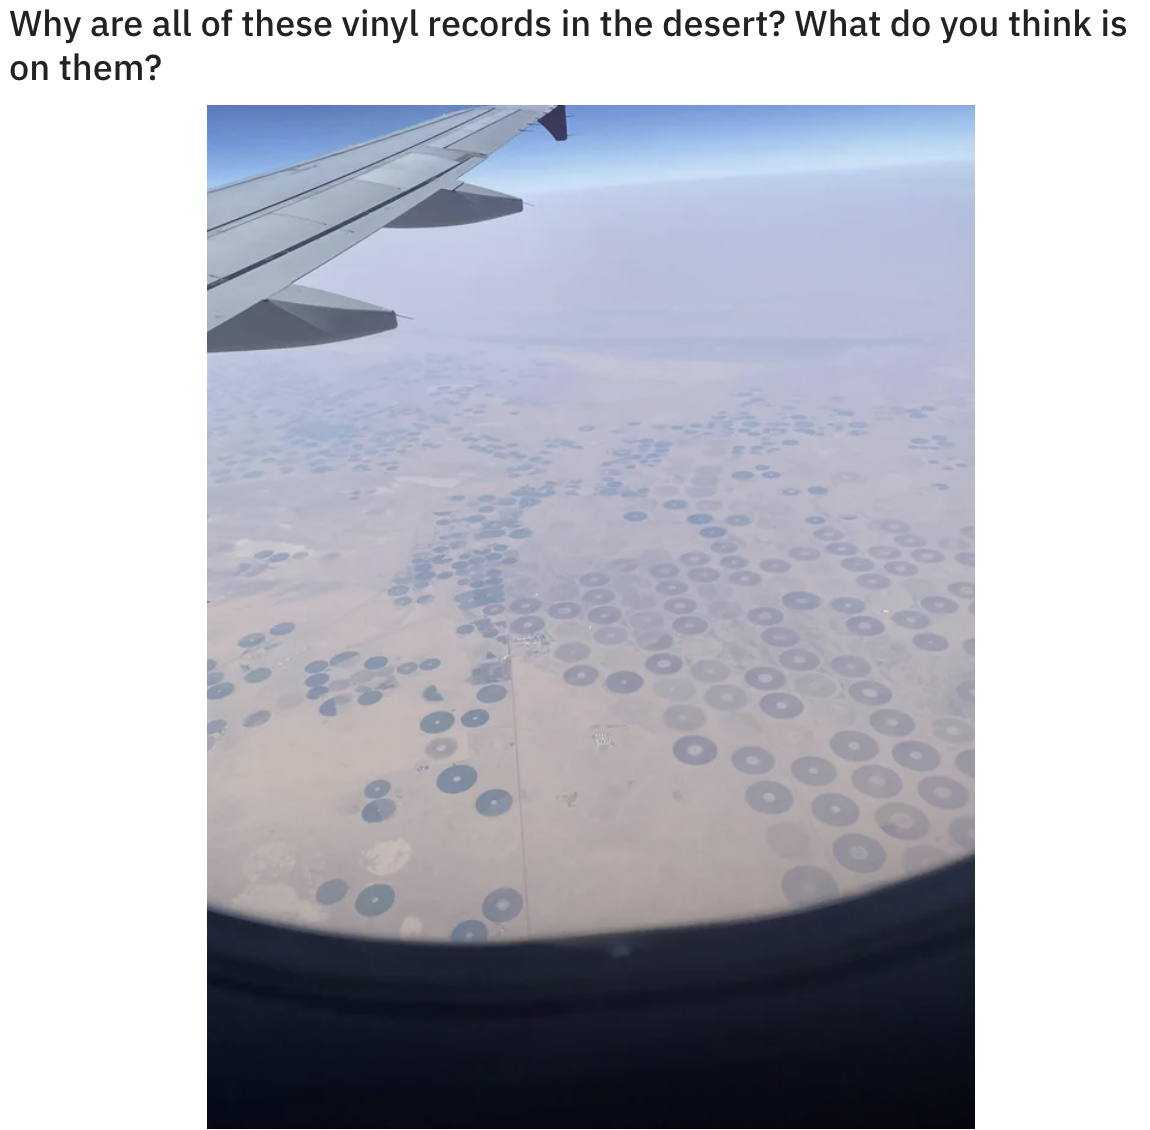 sky - Why are all of these vinyl records in the desert? What do you think is on them? 1000